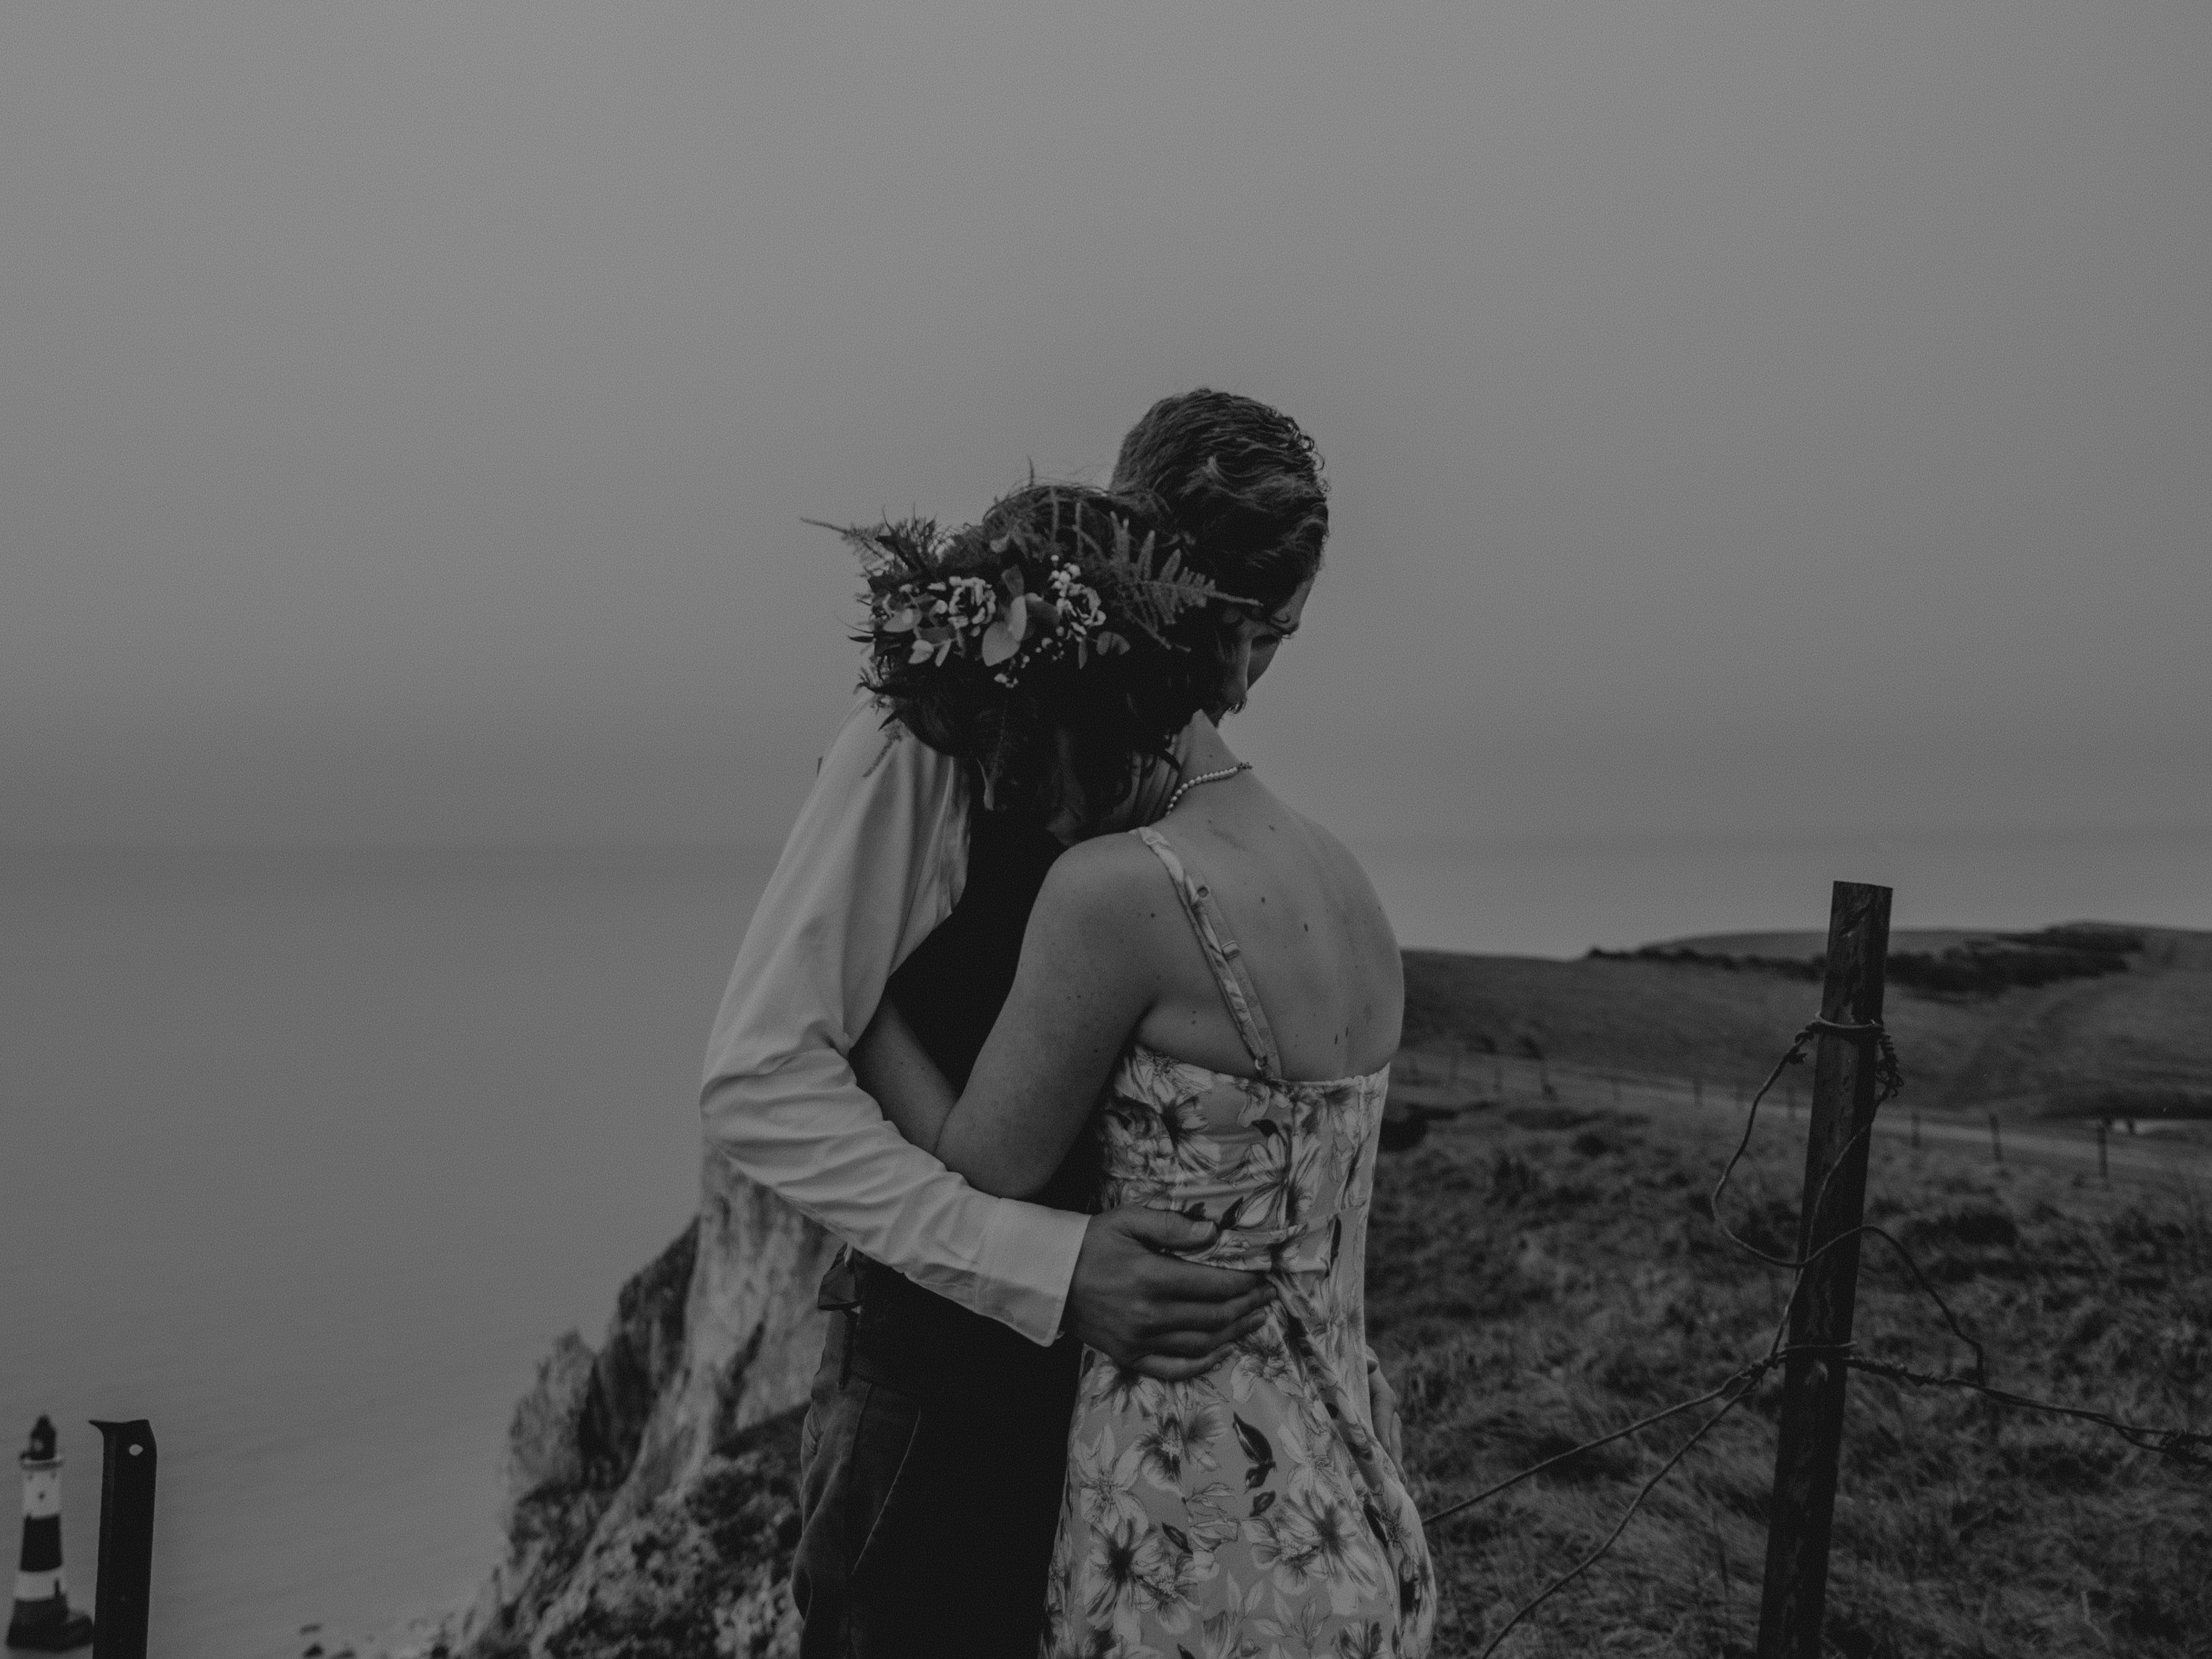 Man and woman embracing each other. | Source: Pexels/ Flora Westbrook